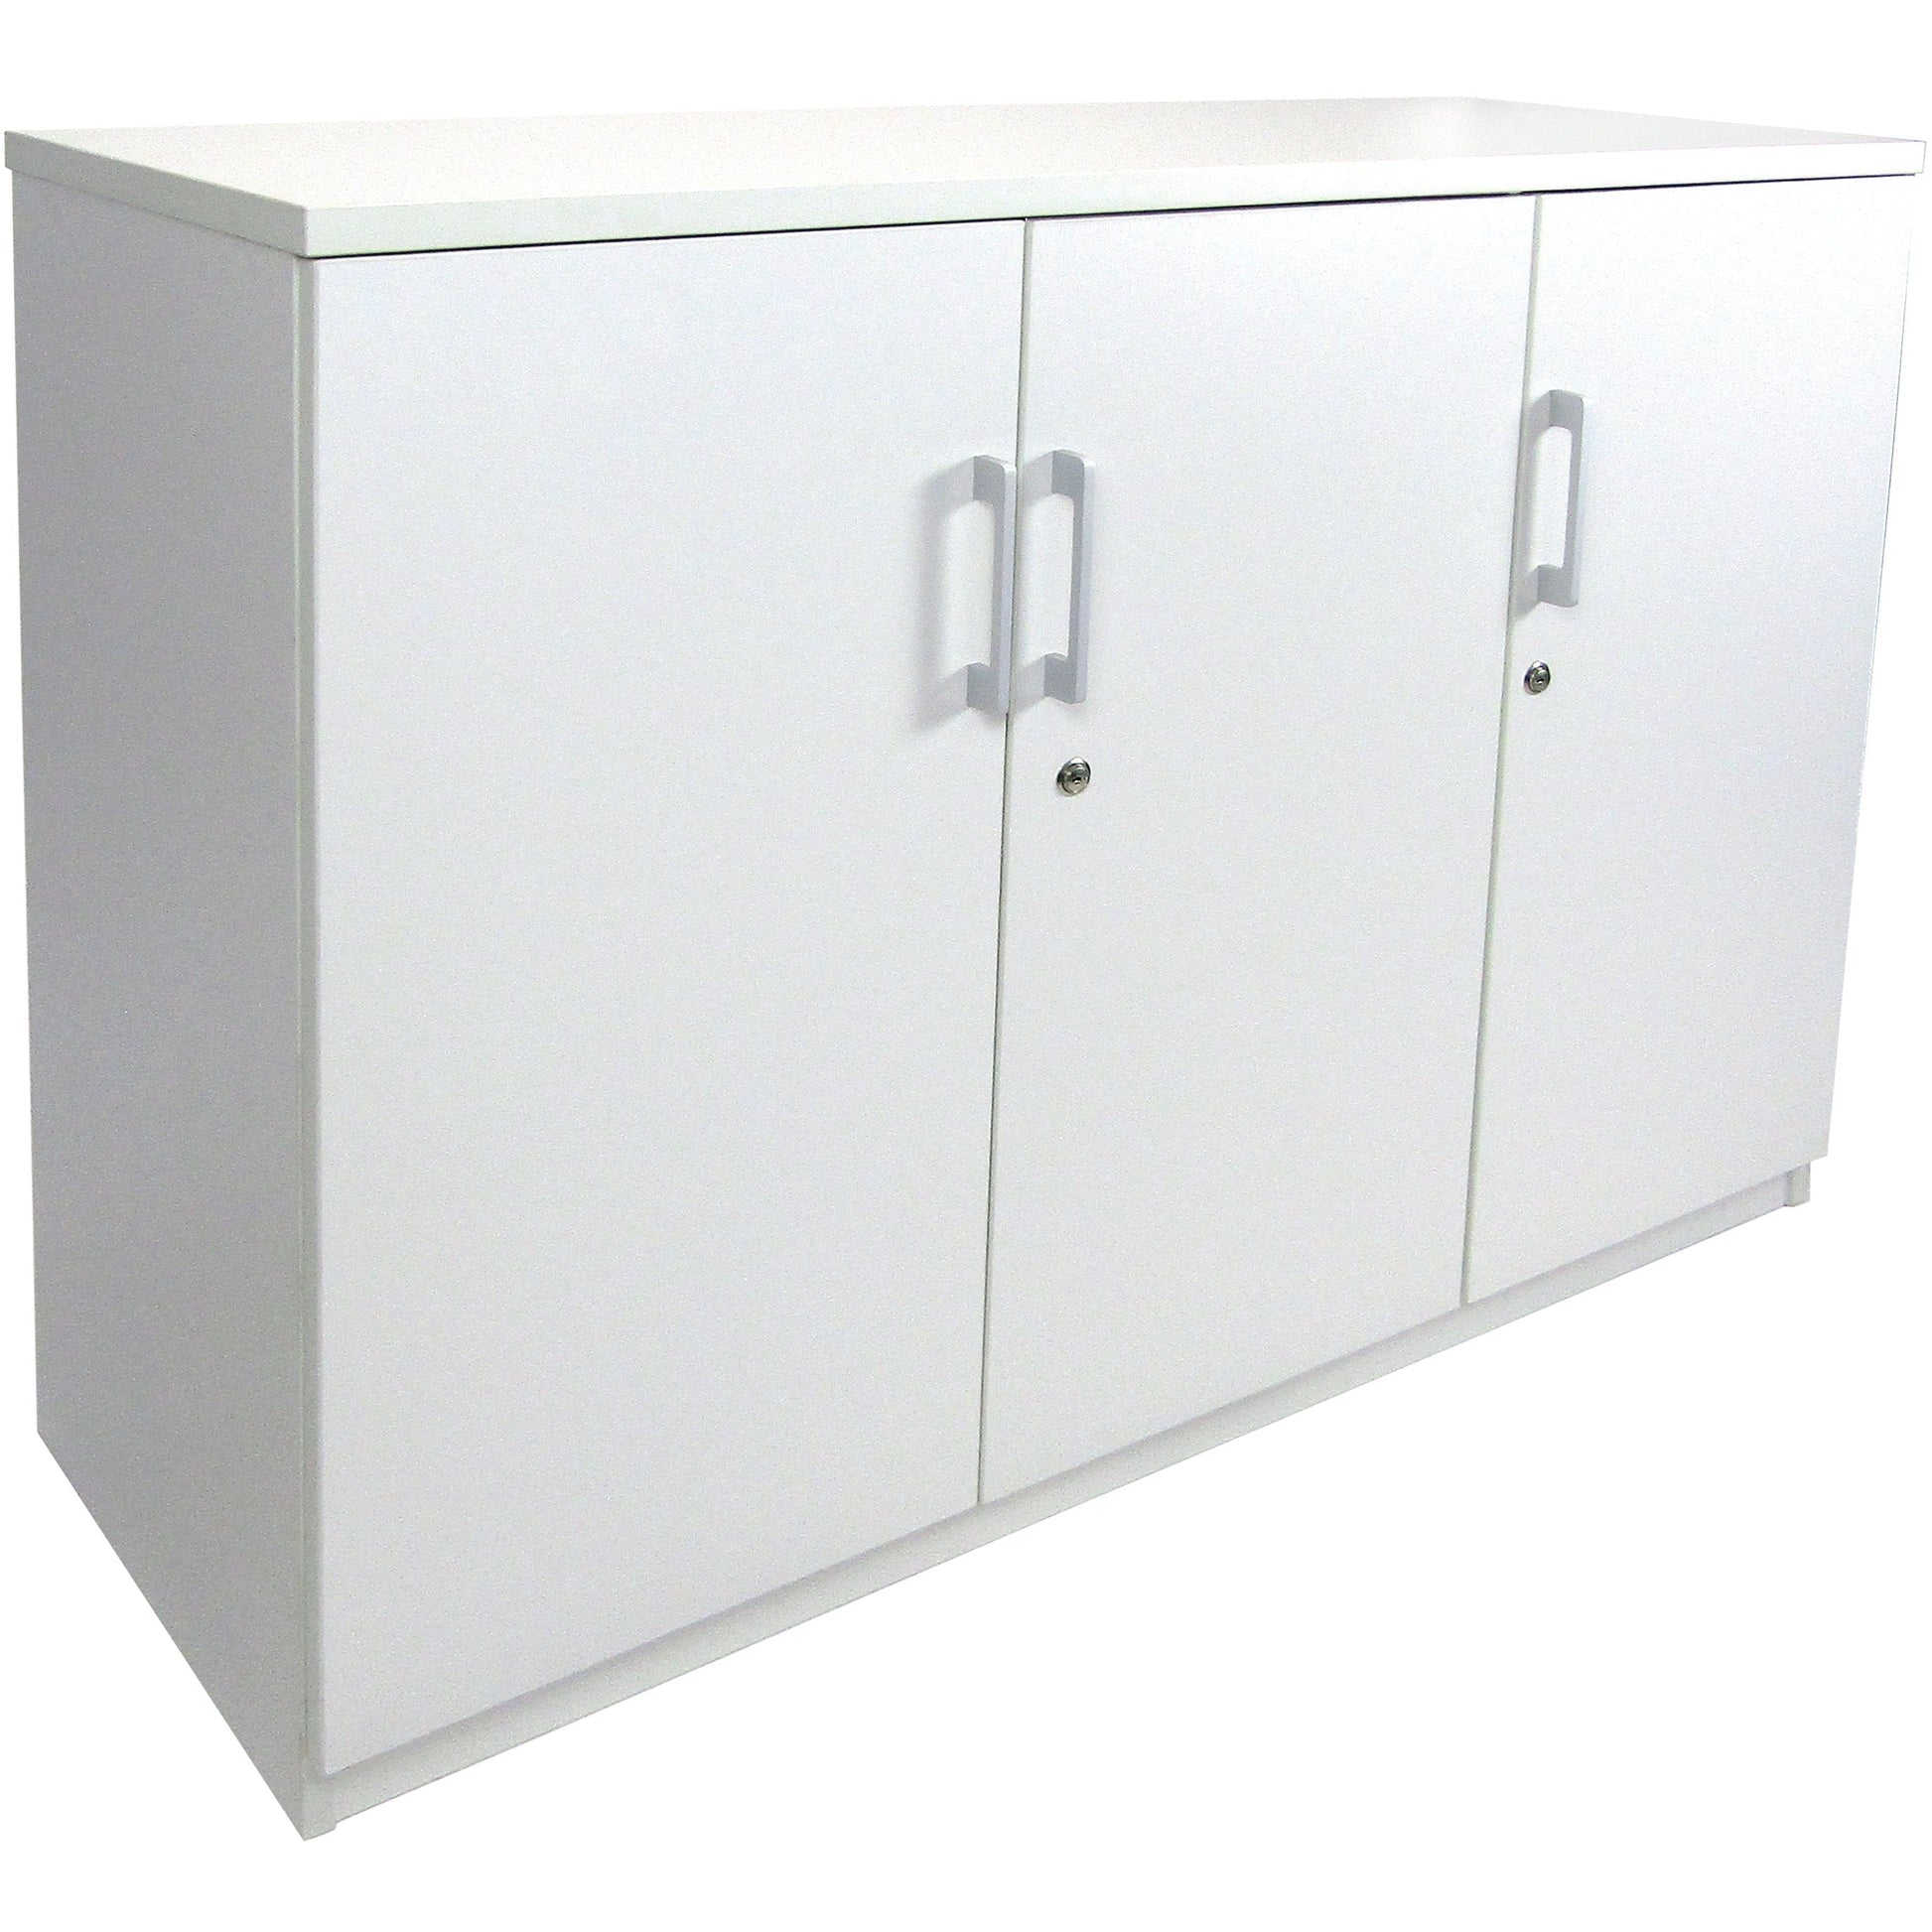 SmartOffice QS Credenza 1200-Workstation & Cubicle Accessories-Smart Office Furniture